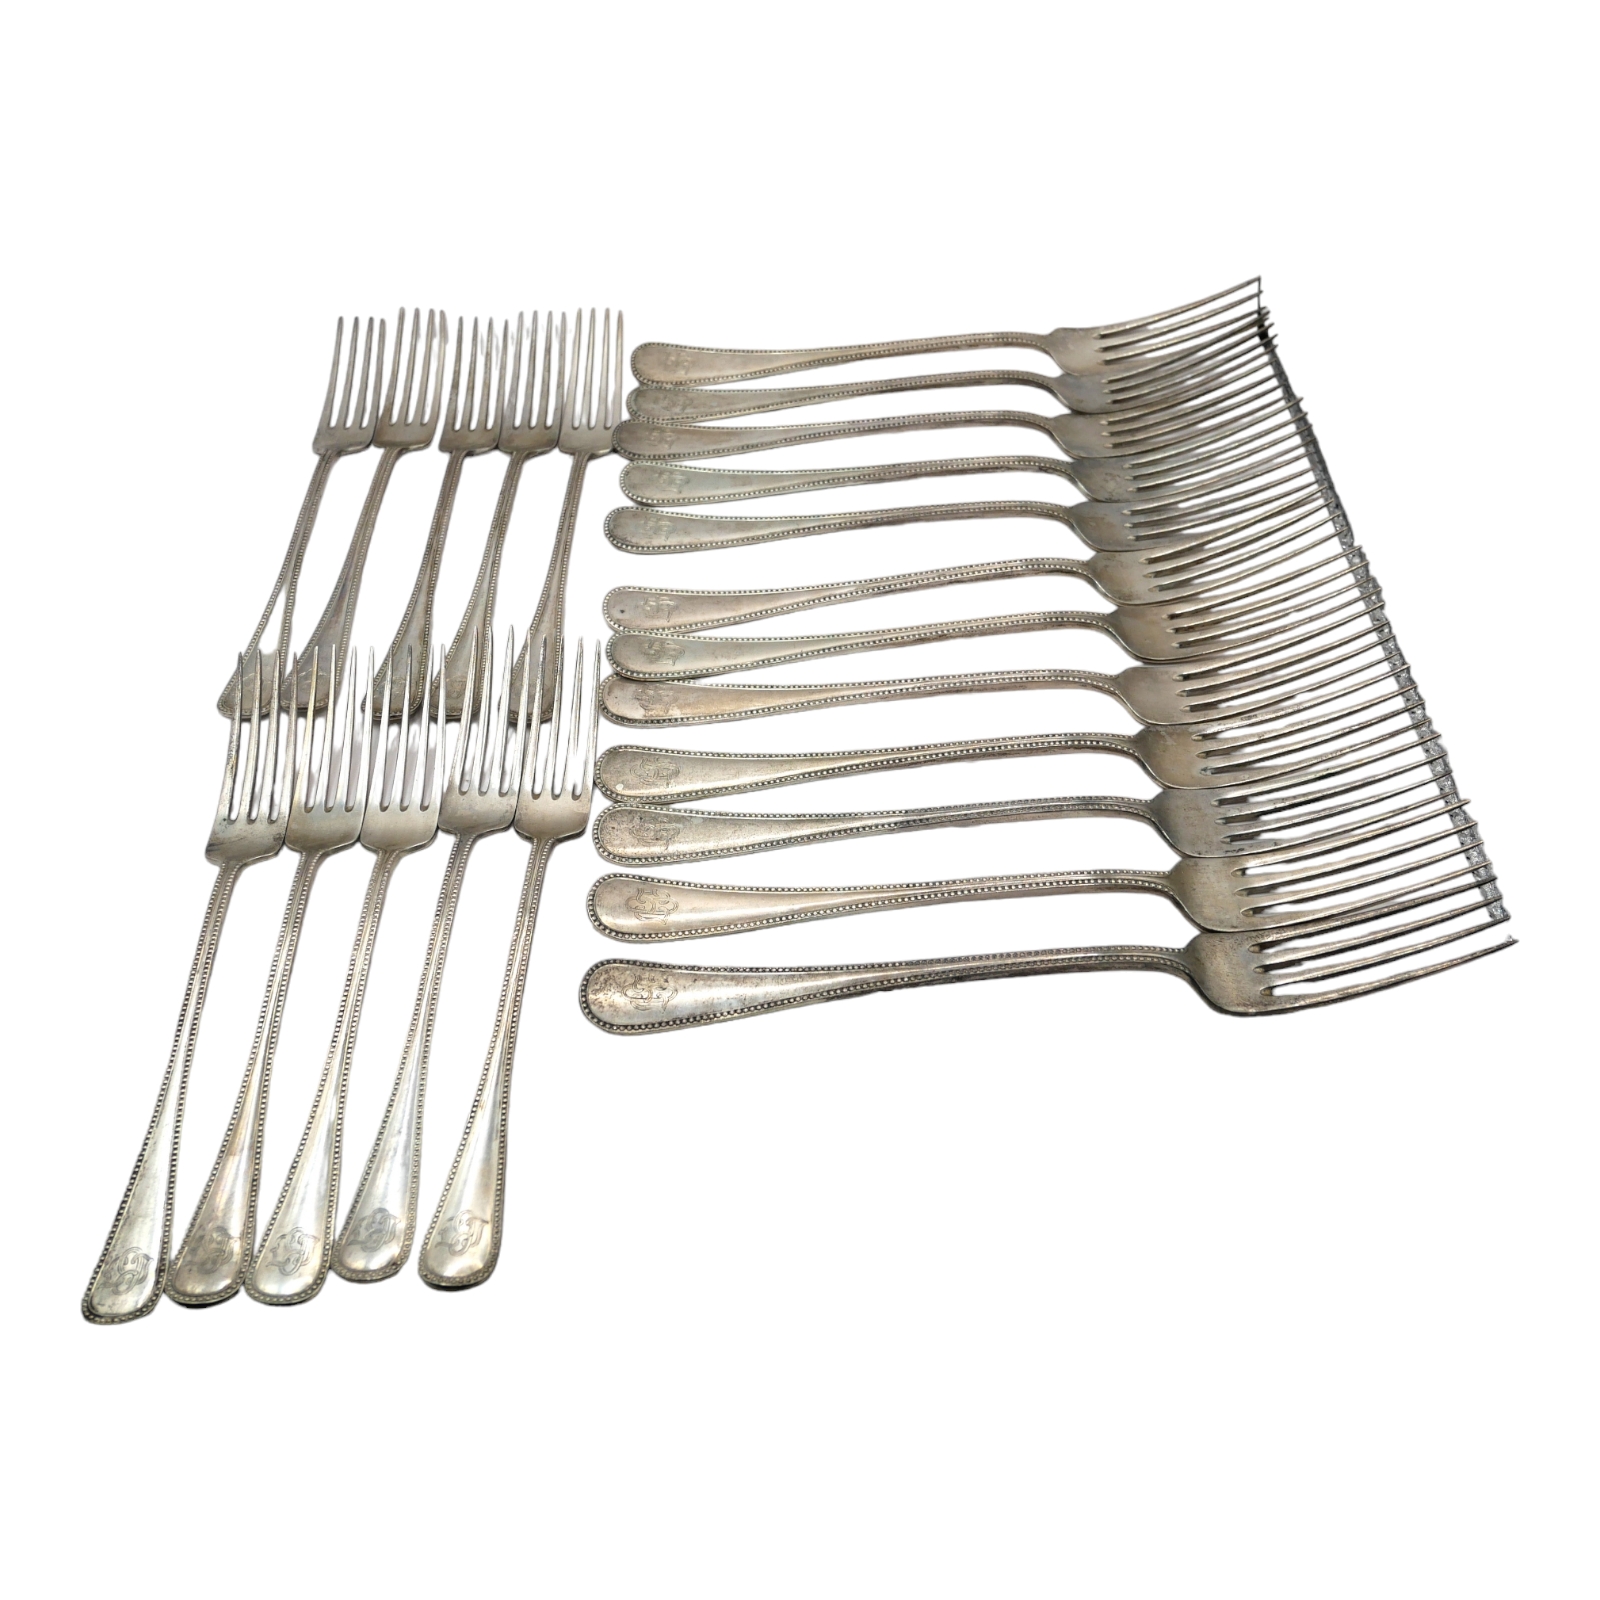 J. TOSTRIP, OSLO, EARLY 20TH CENTURY DANISH SILVER FLATWARE, CIRCA 1918 J. Tostrup, Oslo. Early 20th - Image 5 of 7